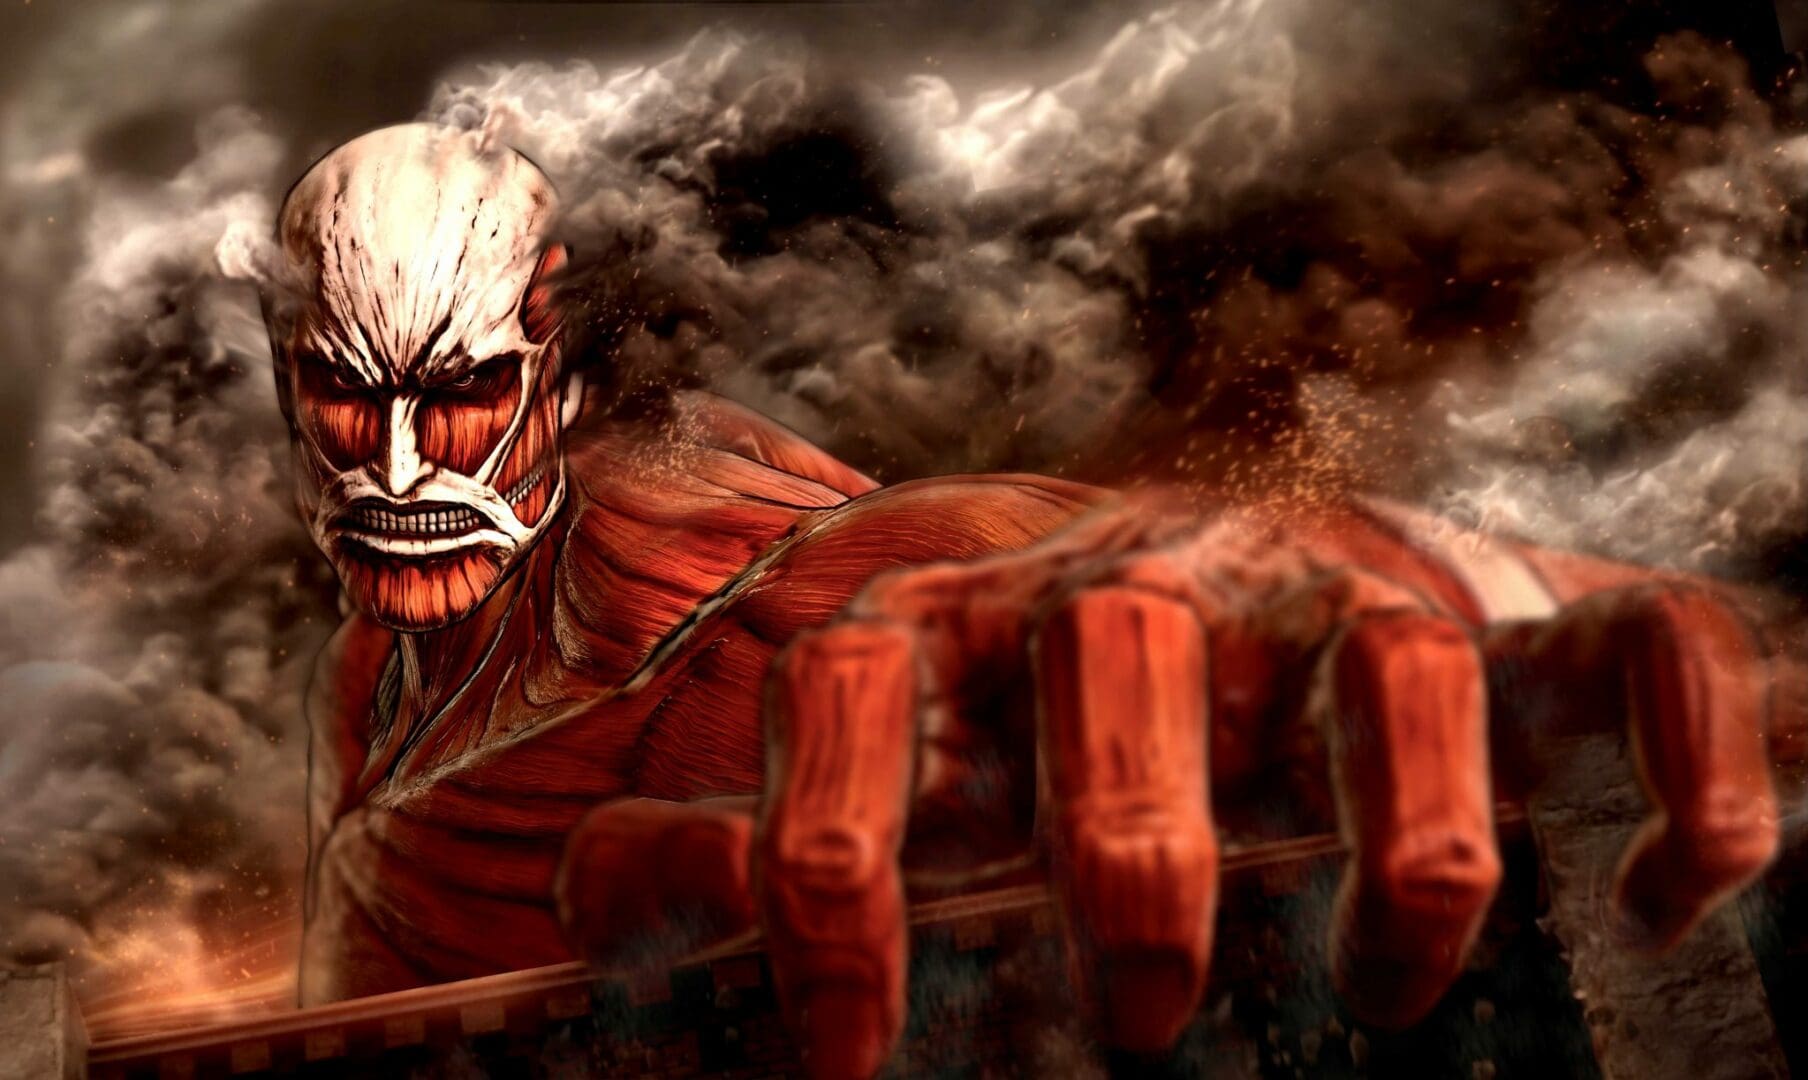 Attack On Titan Game Release Date Announced